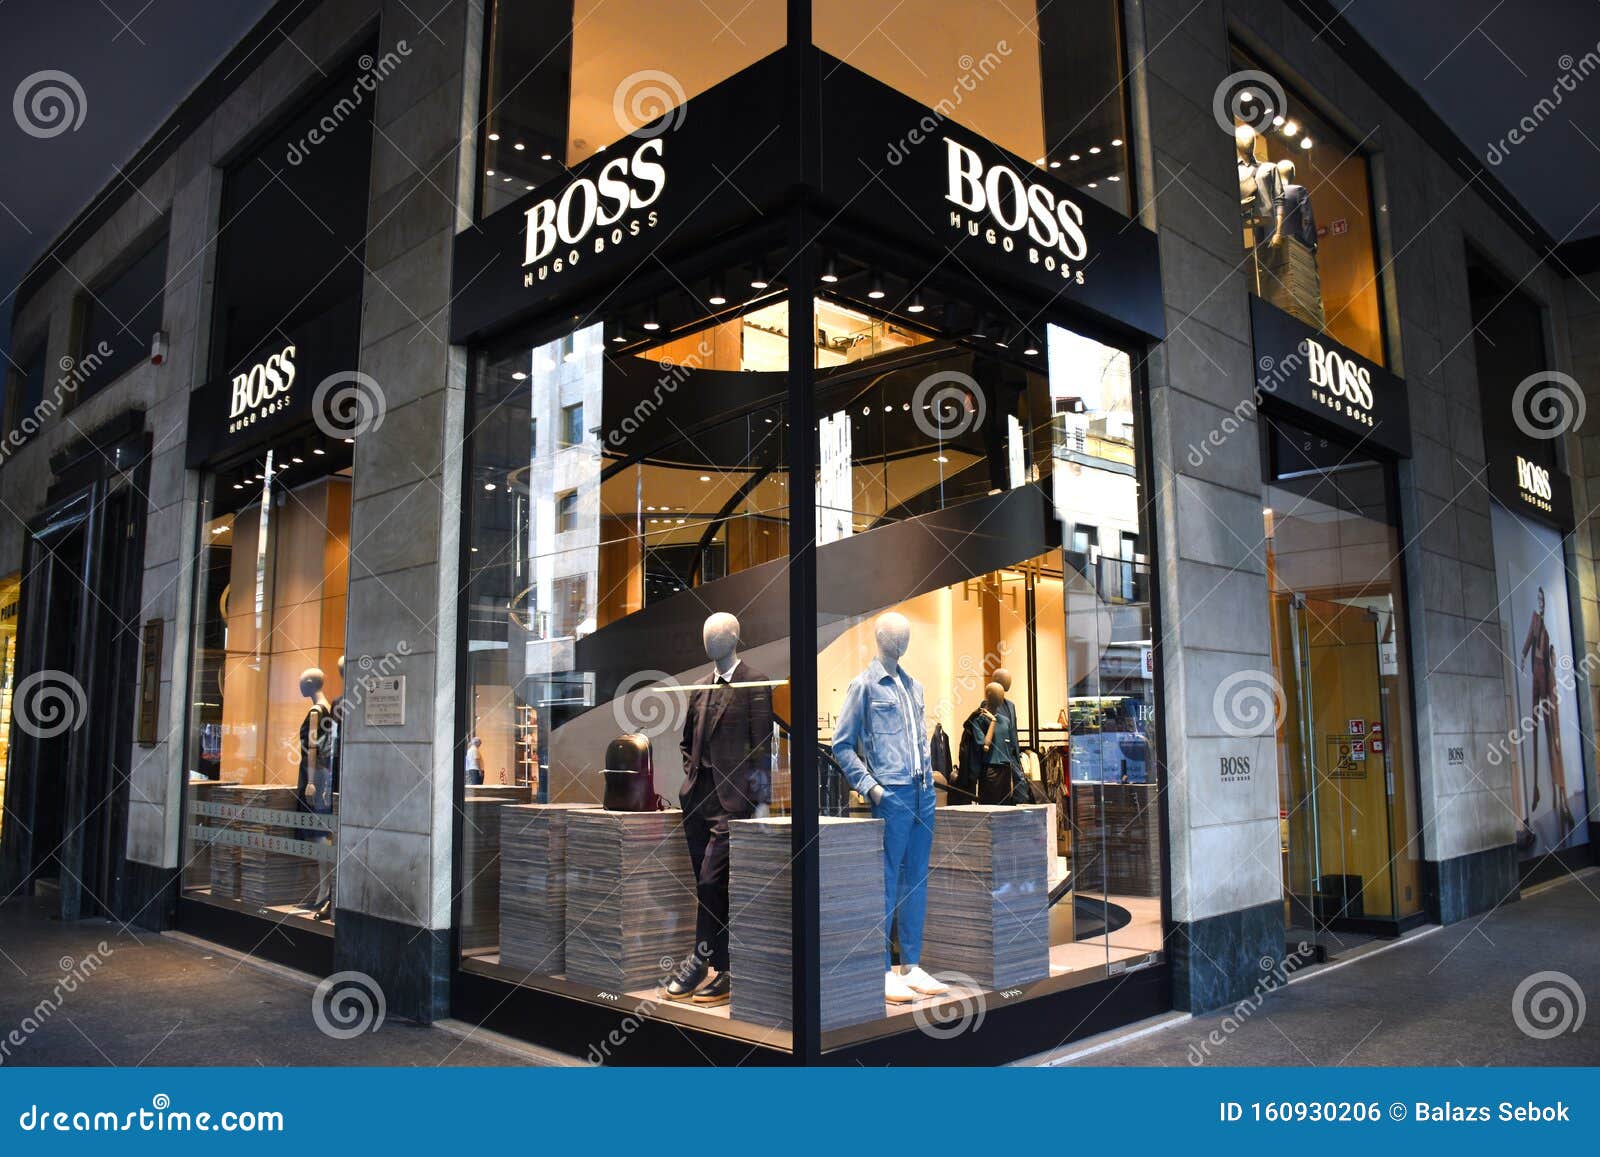 Hugo Boss Store Displays At The Corner Editorial Photo - Image of  handcrafted, brand: 160930206